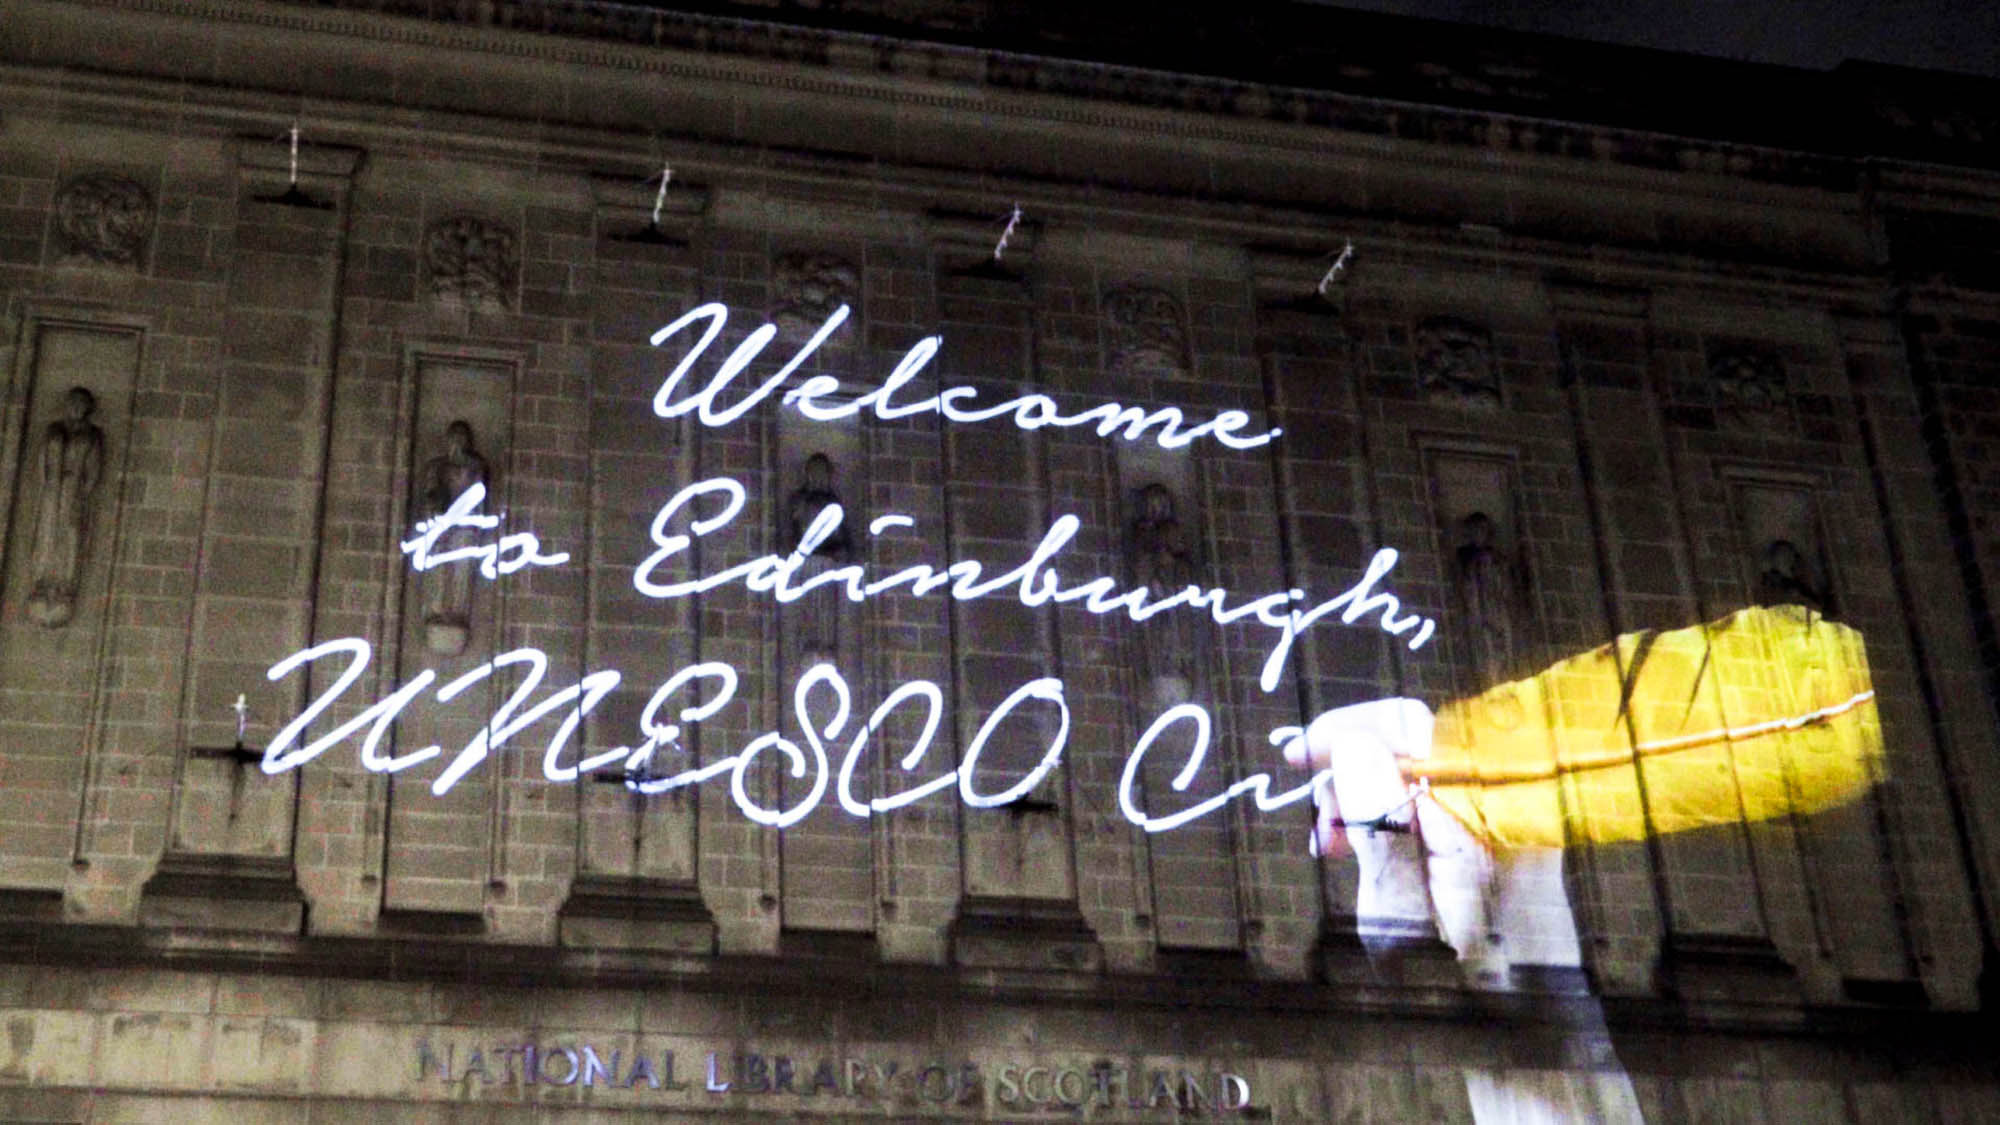 Message from the skies, projection on National Library of Scotland